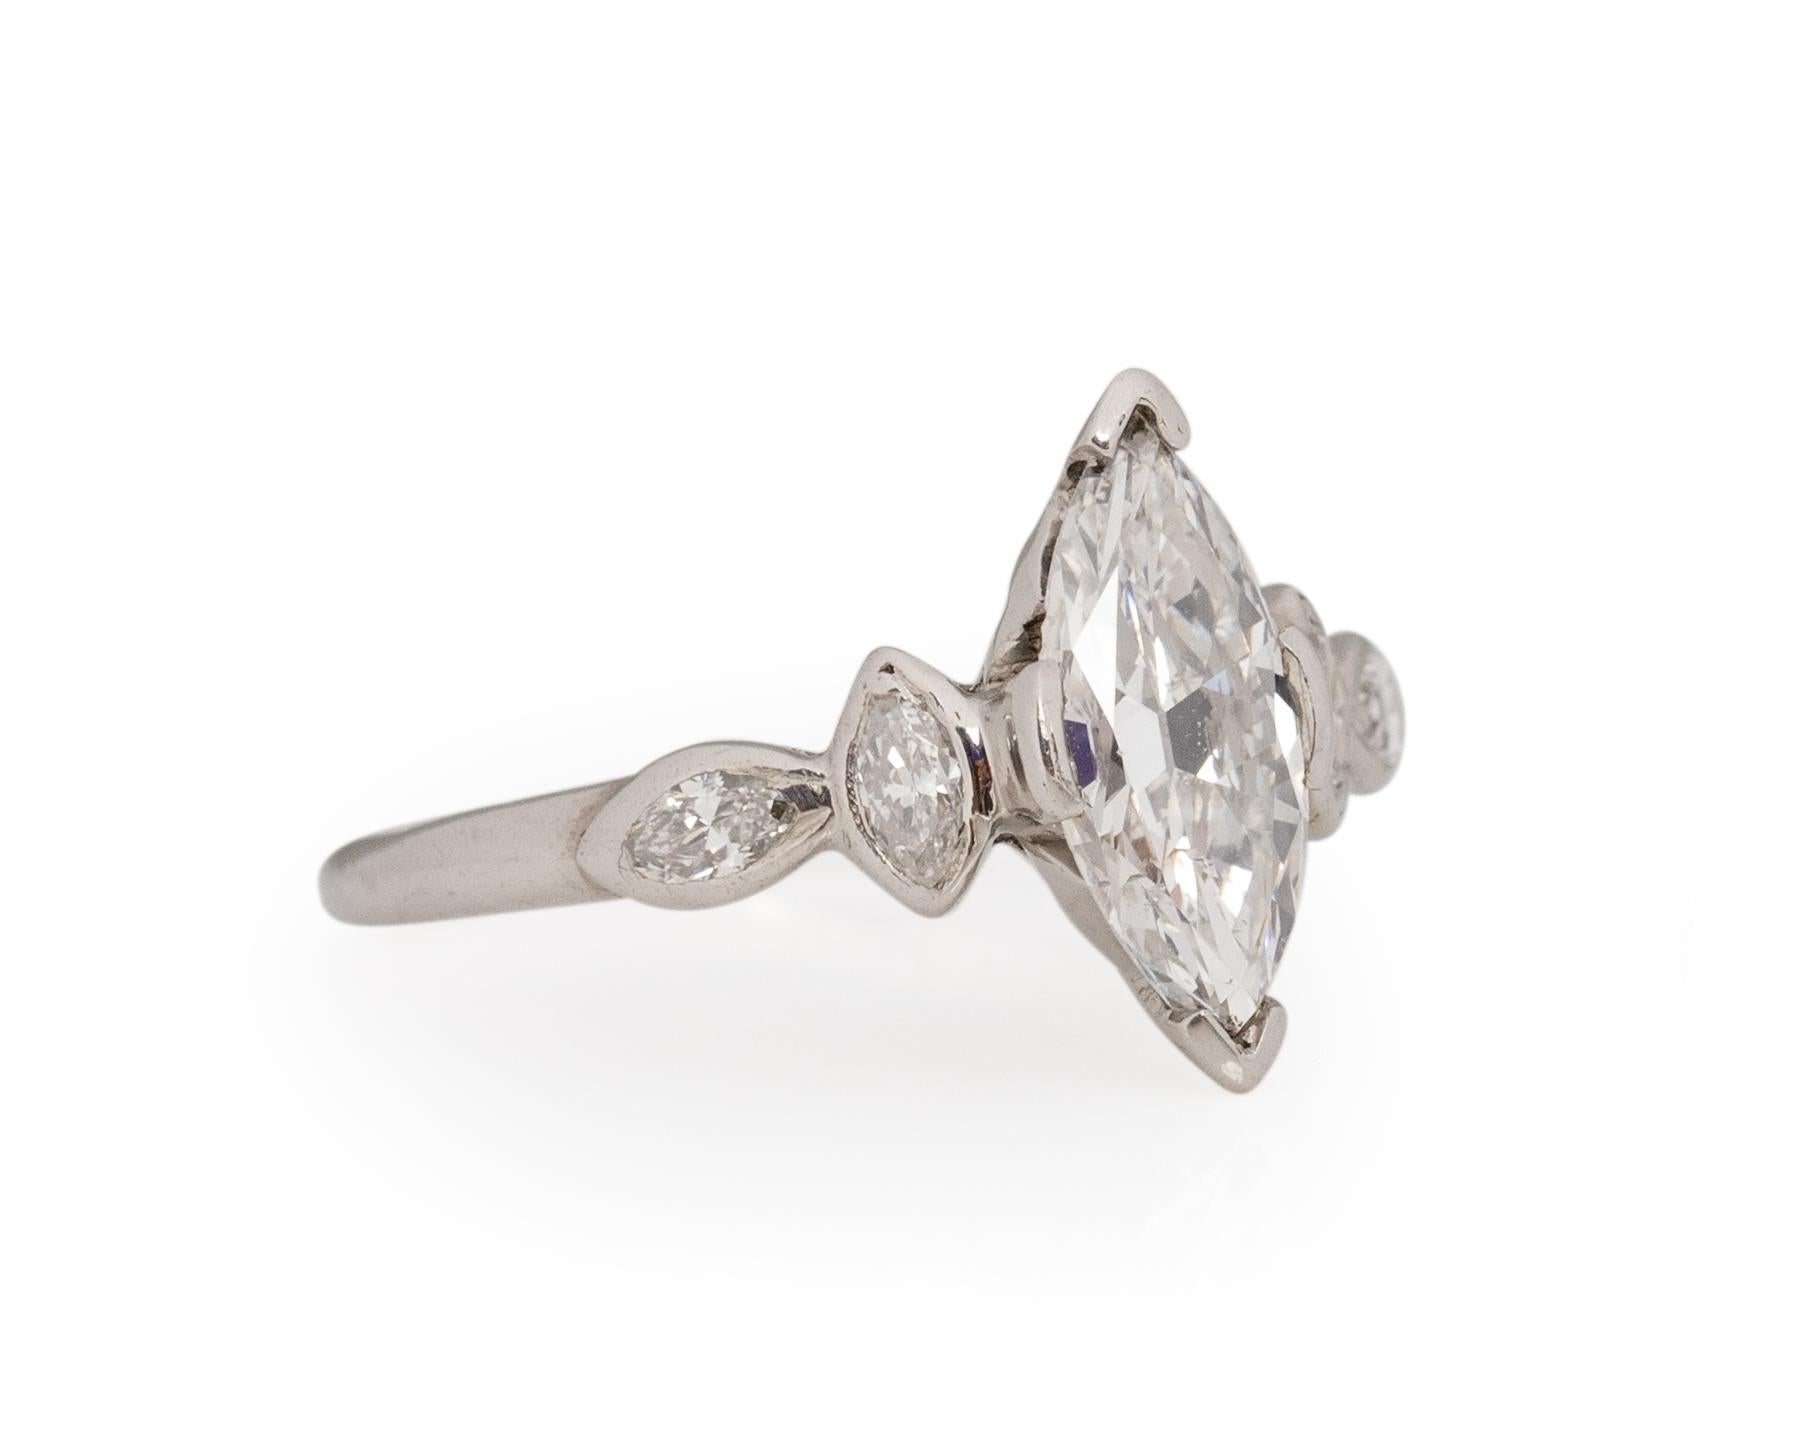 Ring Size: 5
Metal Type: Platinum [Hallmarked, and Tested]
Weight: 3.5 grams

Center Diamond Details:
Weight: .93carat
Cut: Antique Marquise
Color: G
Clarity: SI2

Side Stone Details:
Weight: .20carat, total weight
Cut: Antique Marquise
Color: